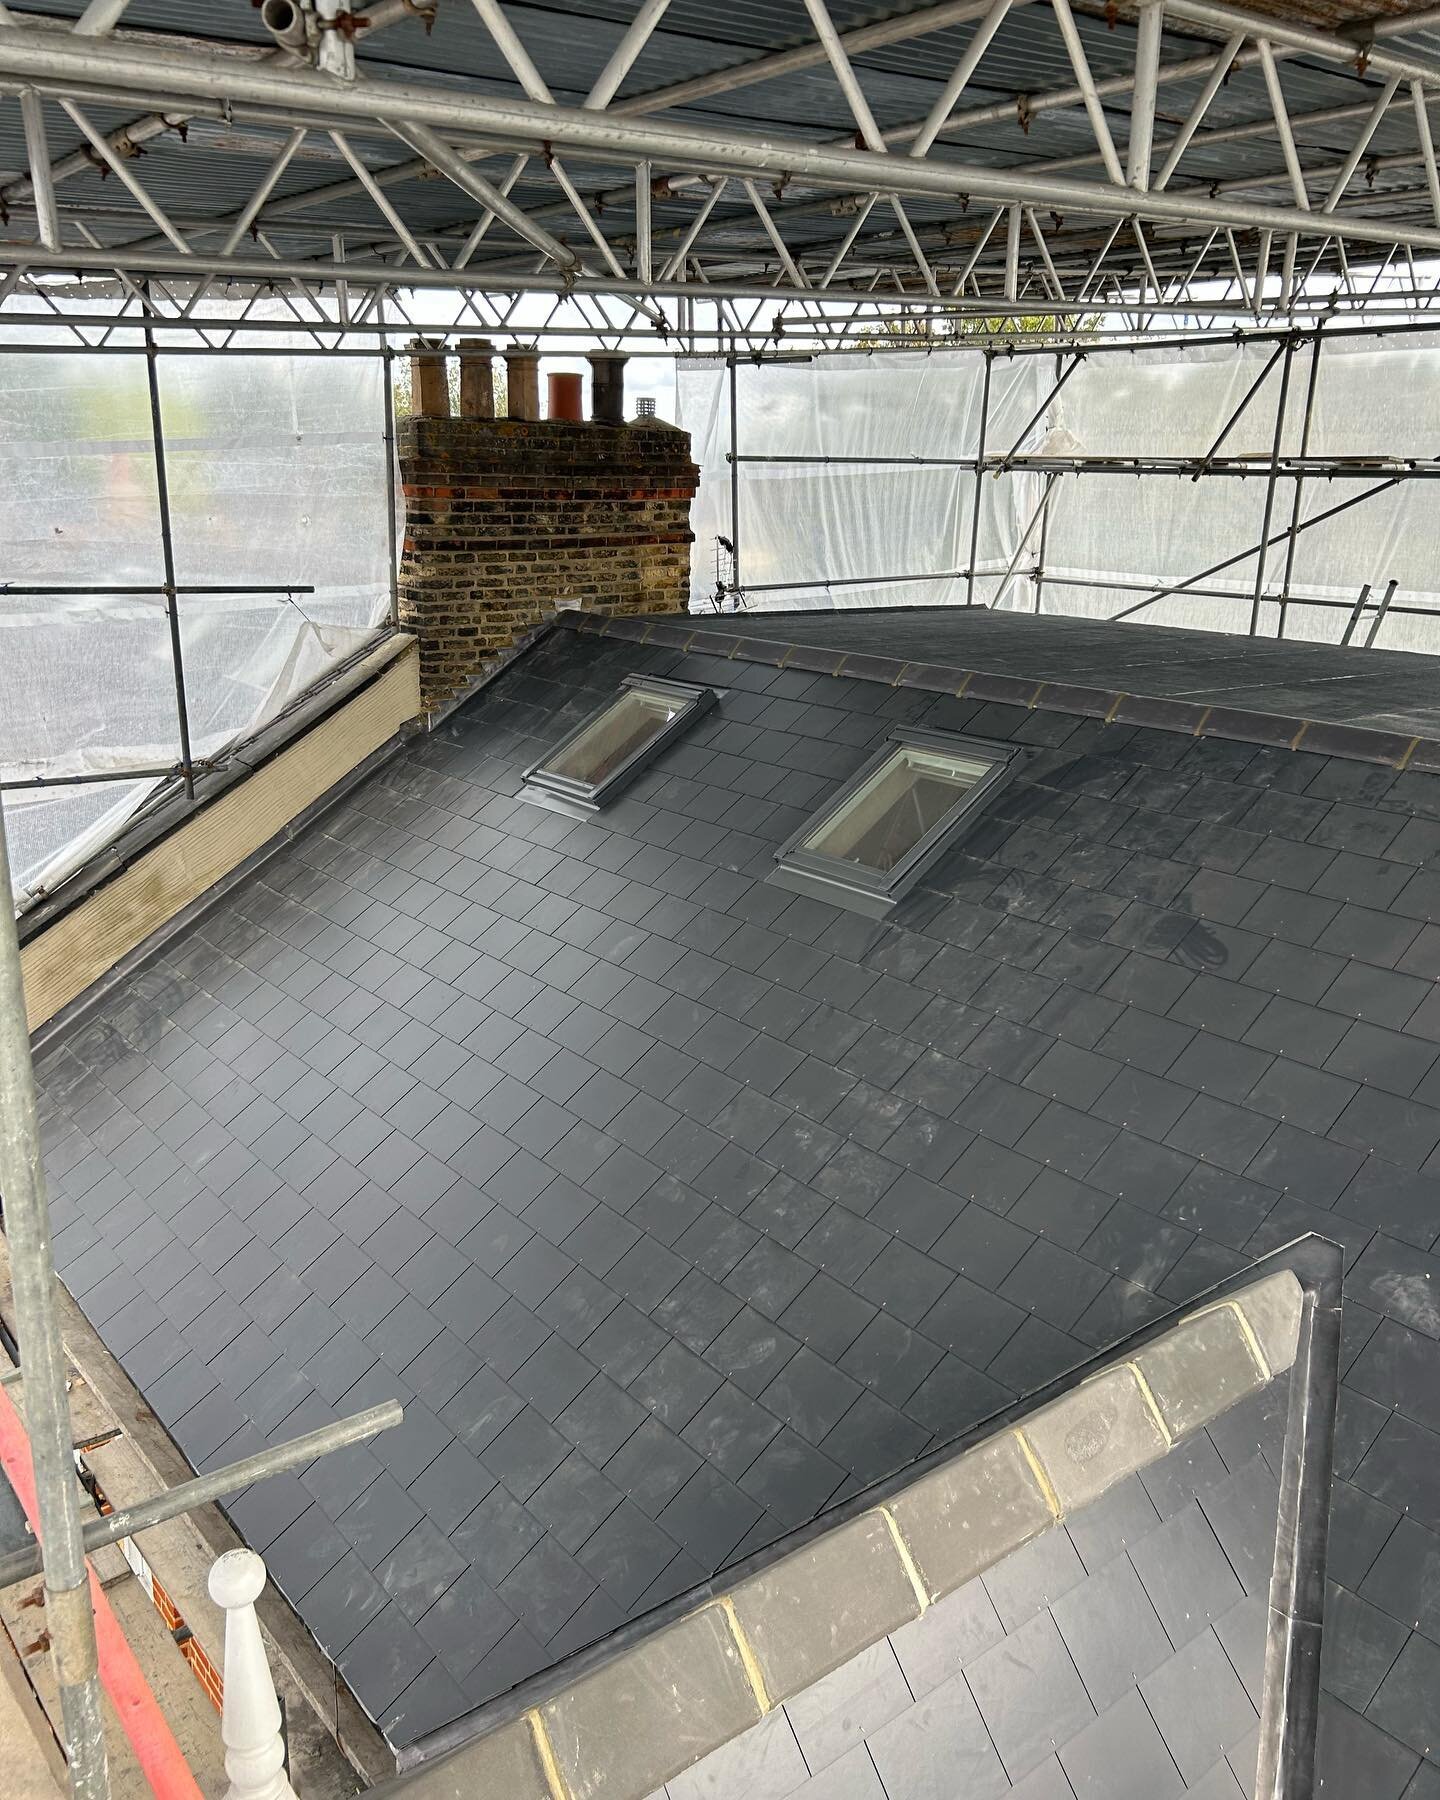 A Reroof in eltham we have just completed with new marley eternit slate and 3 layer felt system to flat roof on dormer Visit www.sapsford.co